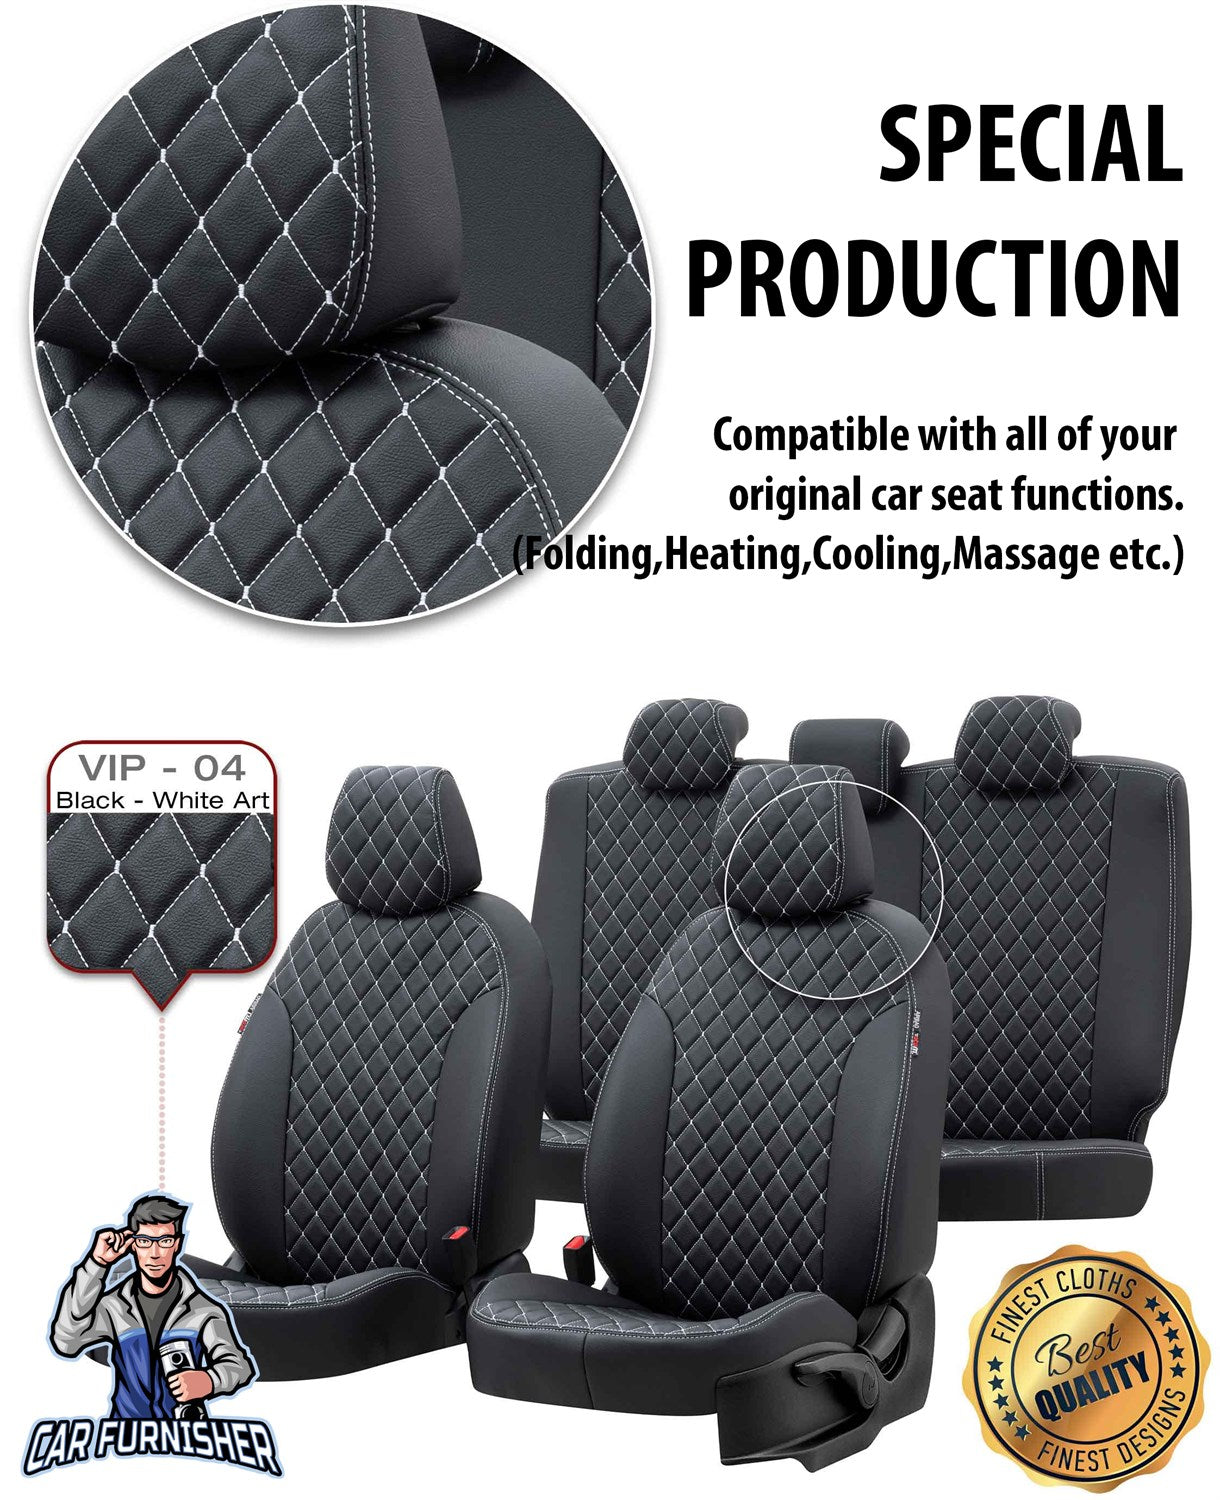 Mercedes S Class Seat Covers Madrid Leather Design Dark Gray Leather